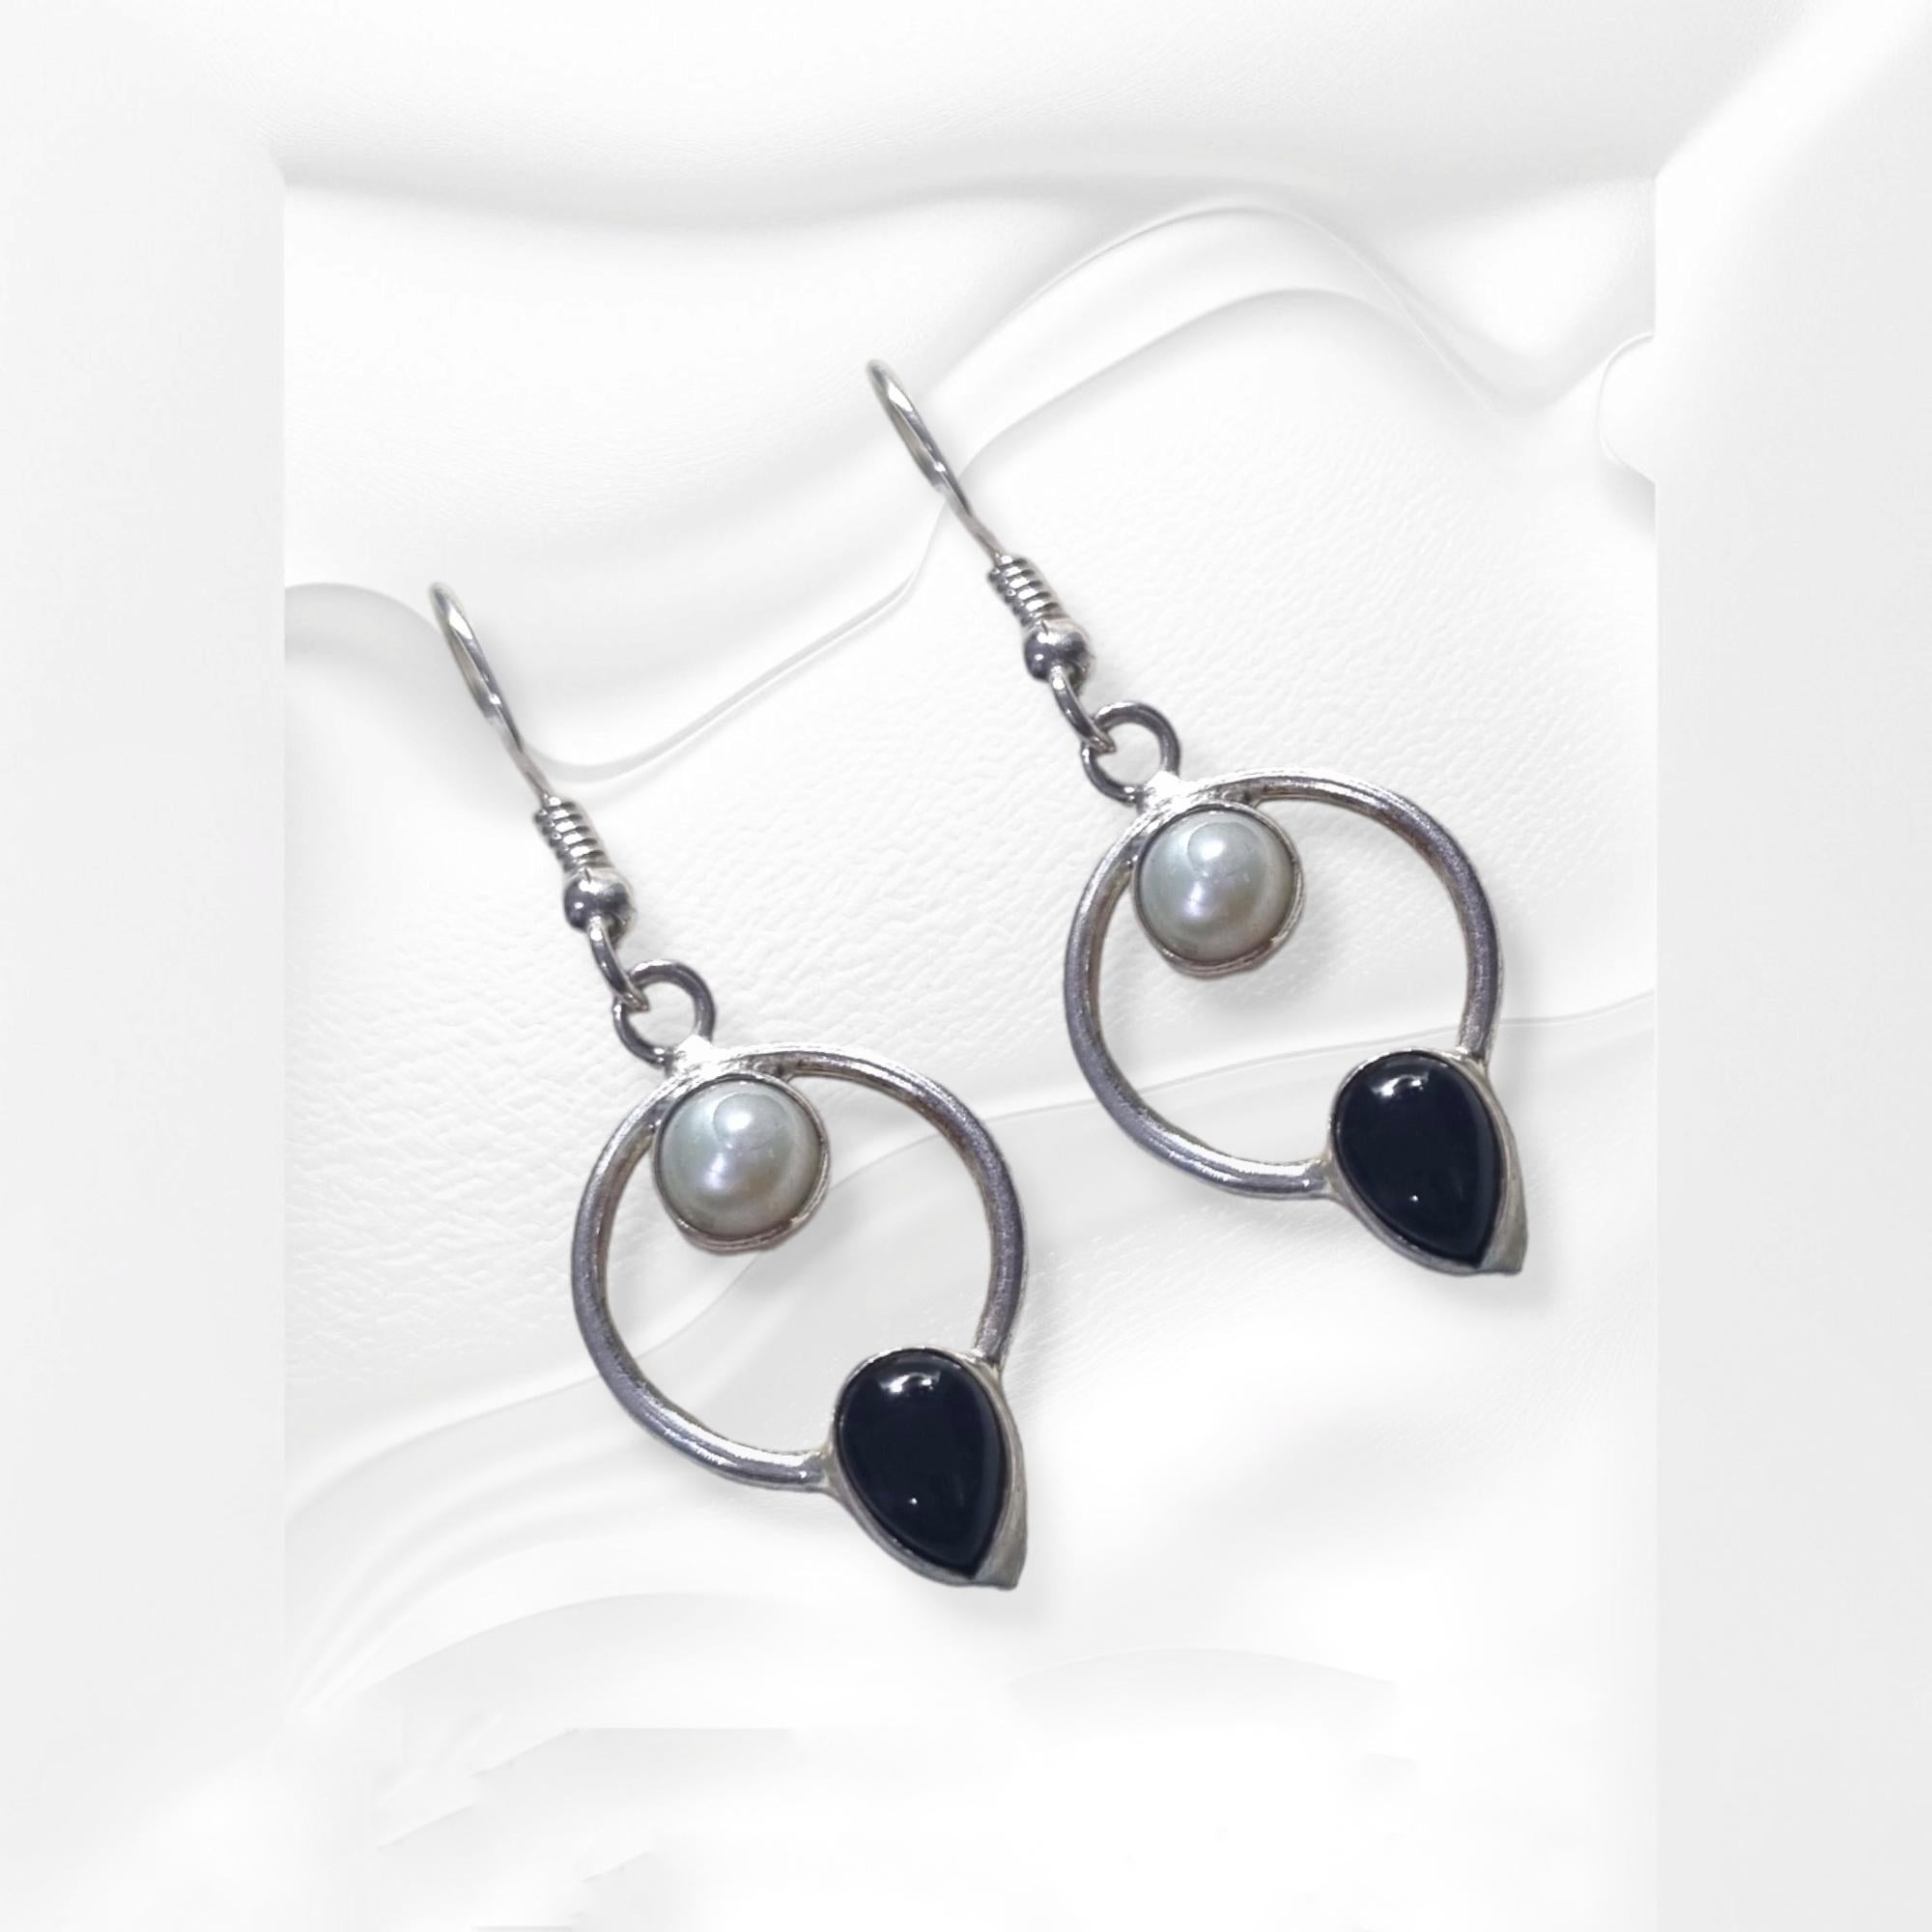 Product Details

Metal - Sterling silver
Gross Weight - 3.98 Grams
Gemstones - pearls & Black Onyx
Size - 40 mm x 10 mm

Introducing our exquisite designer earrings crafted with sophistication and elegance in mind. These captivating earrings feature